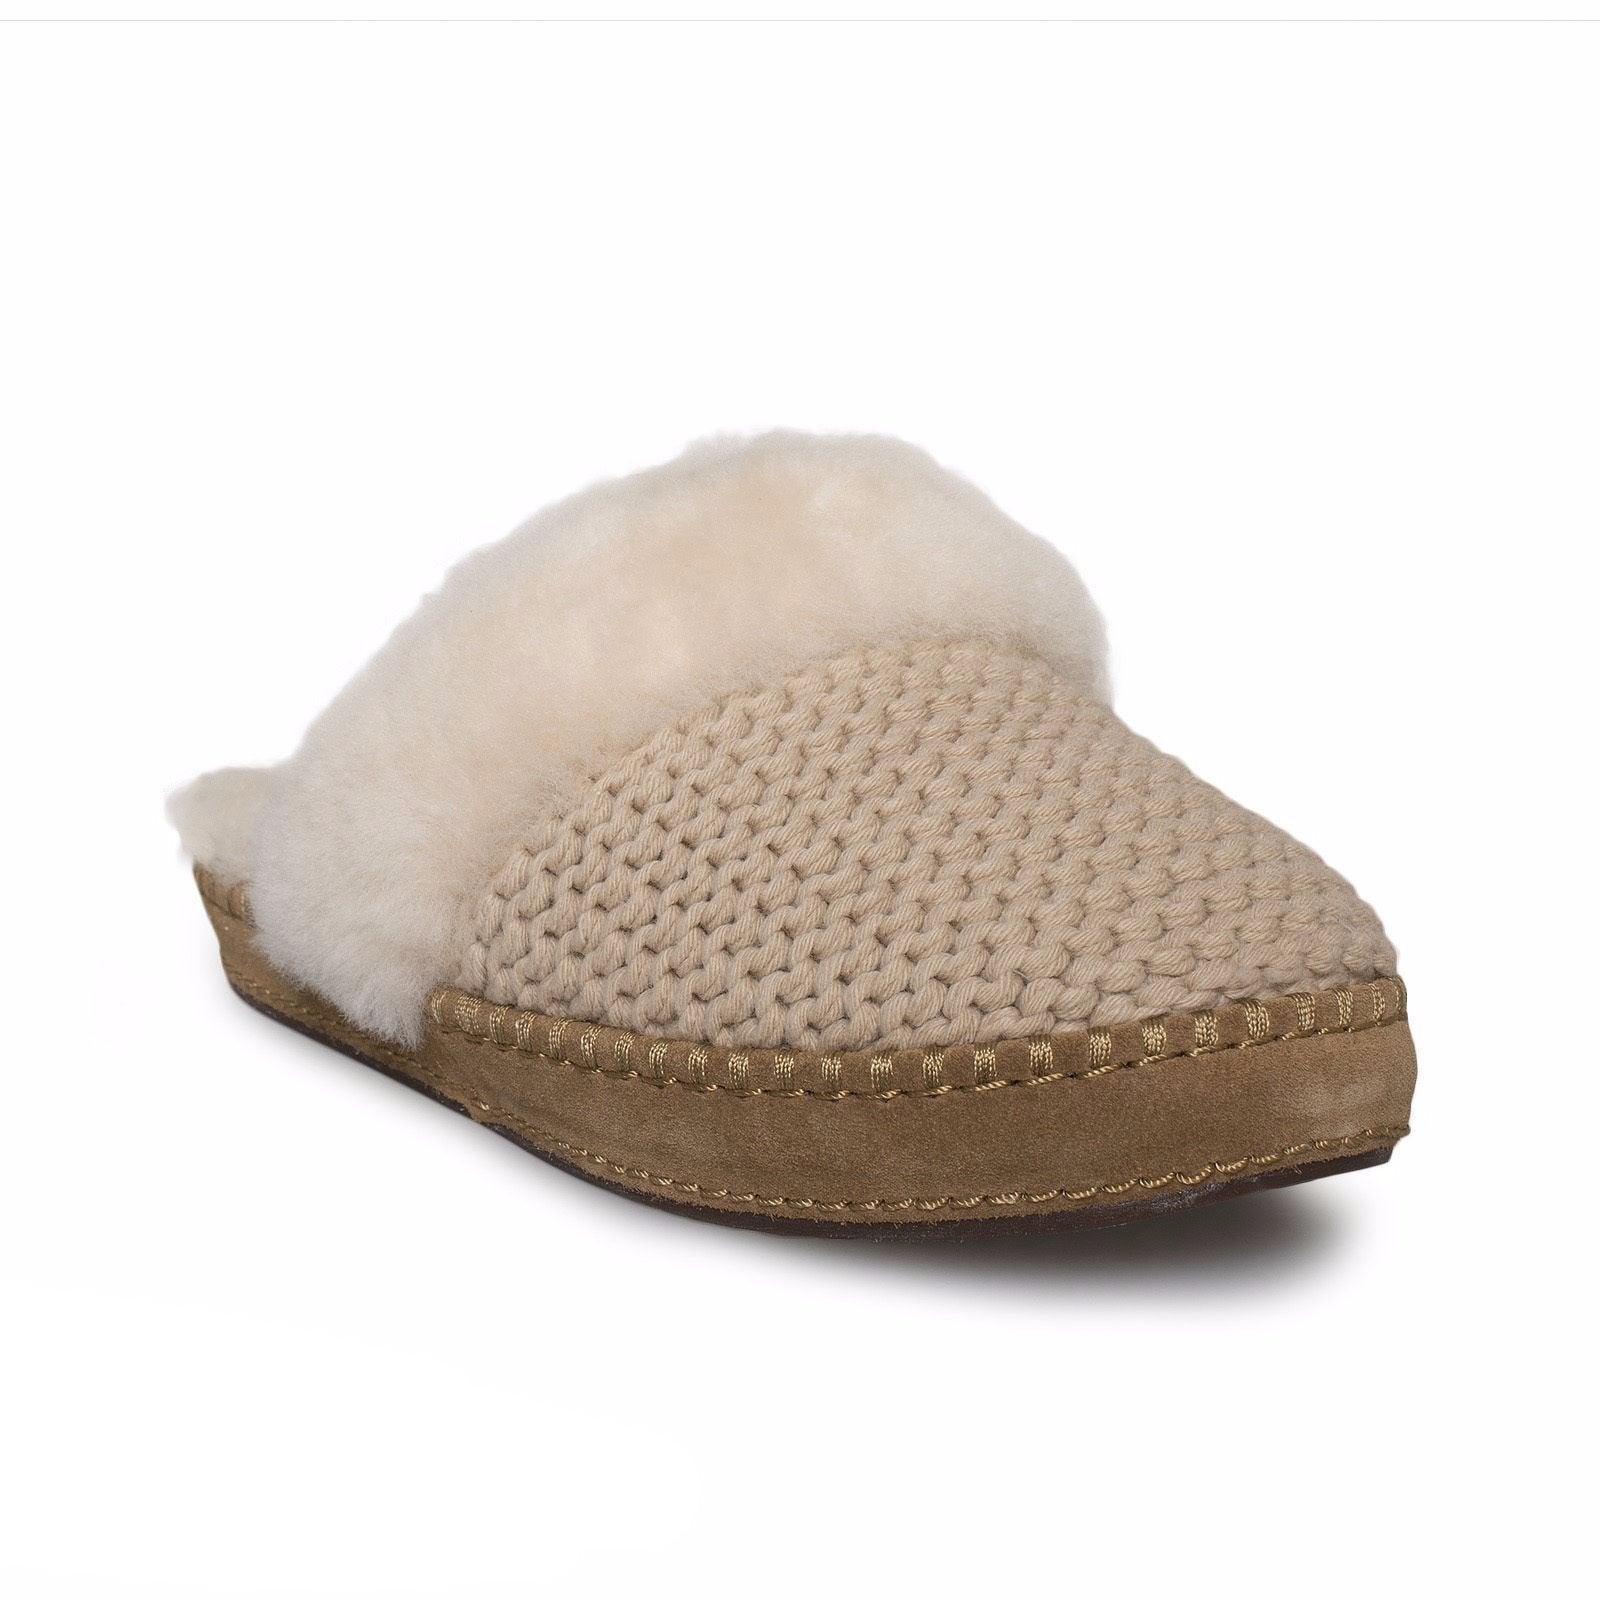 ugg aira slippers size 8